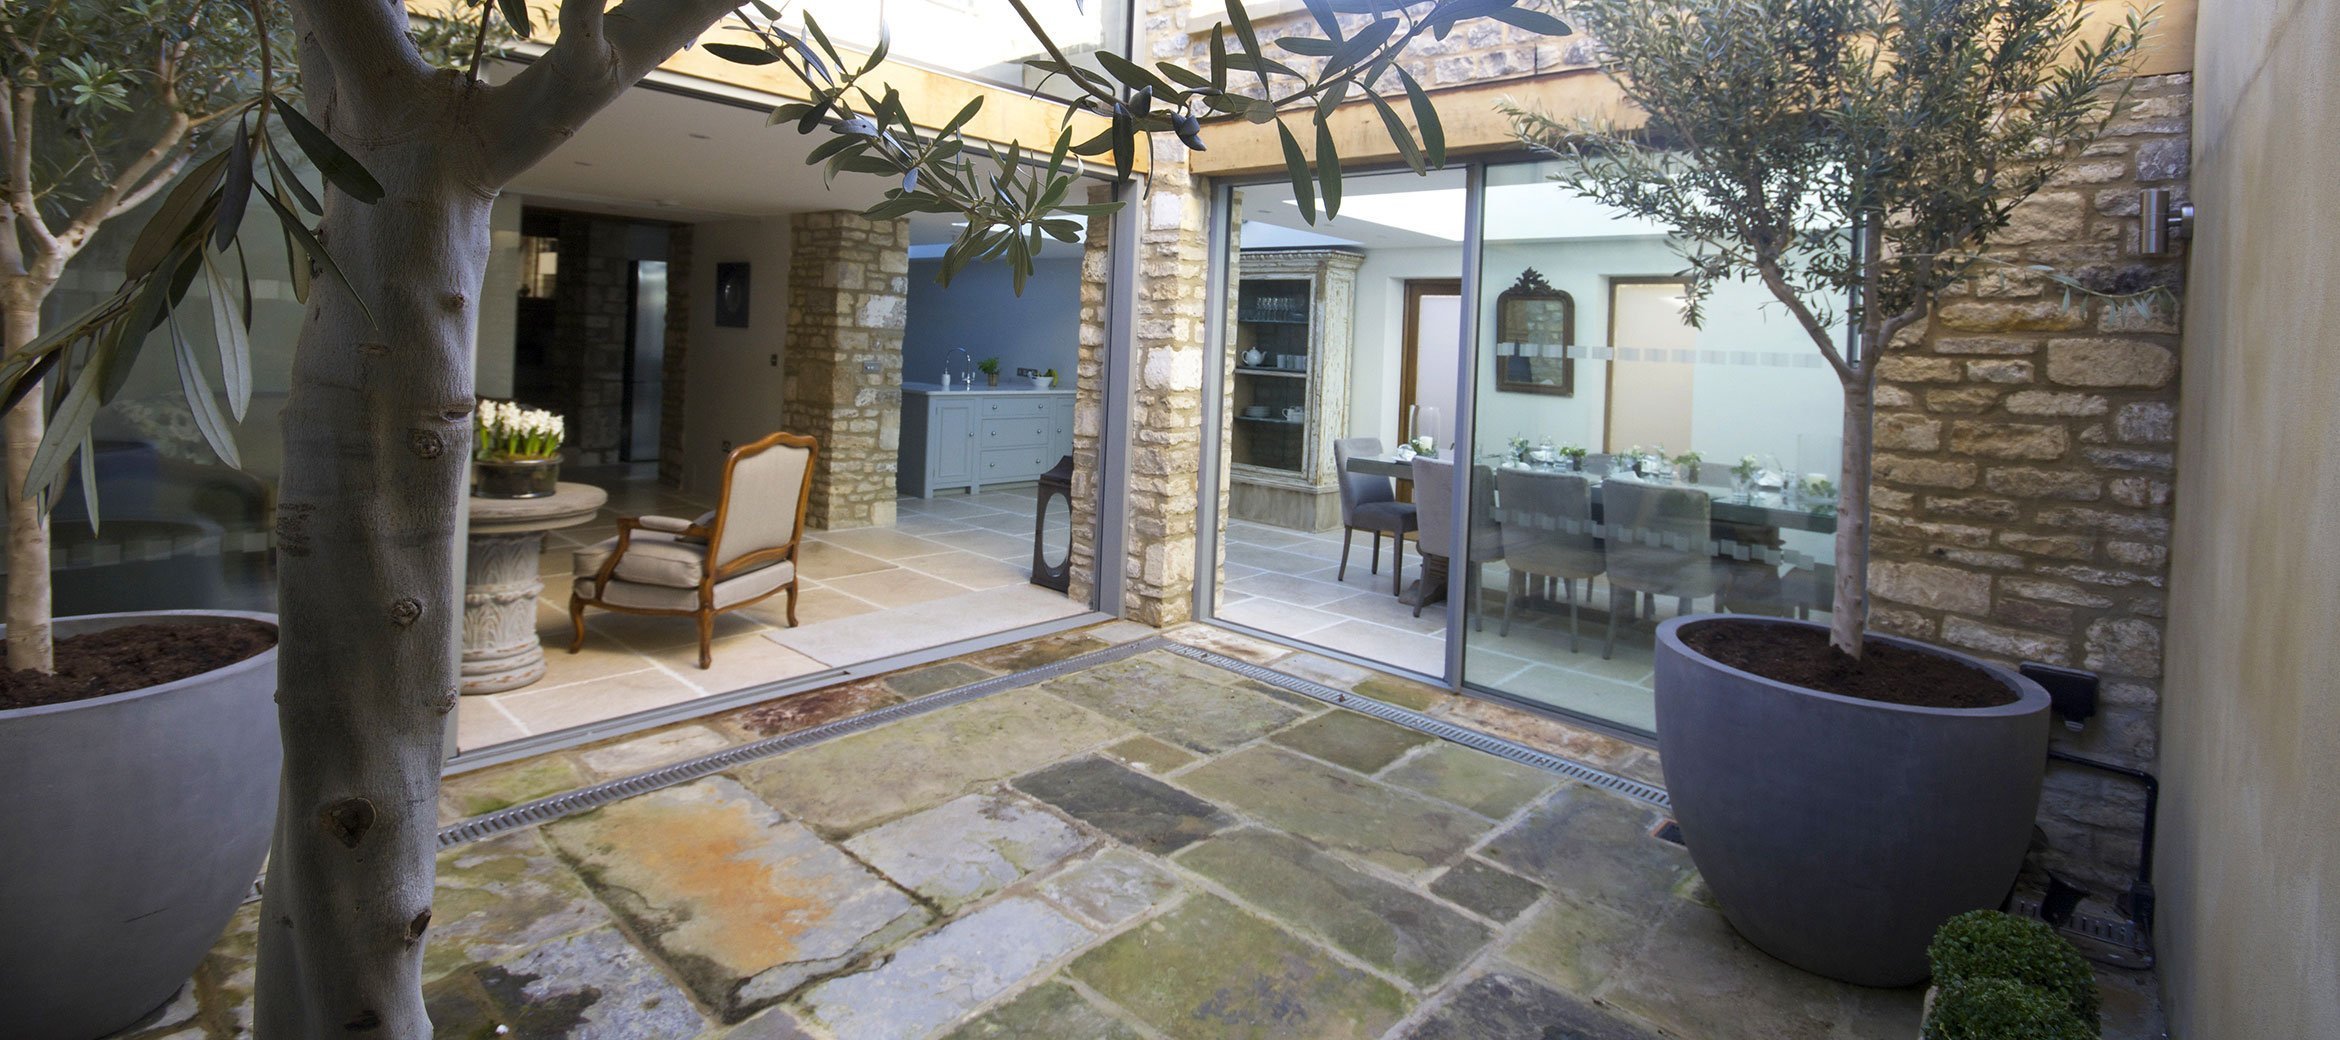 burford-cotswold-cottage-dining-kitchen-courtyard